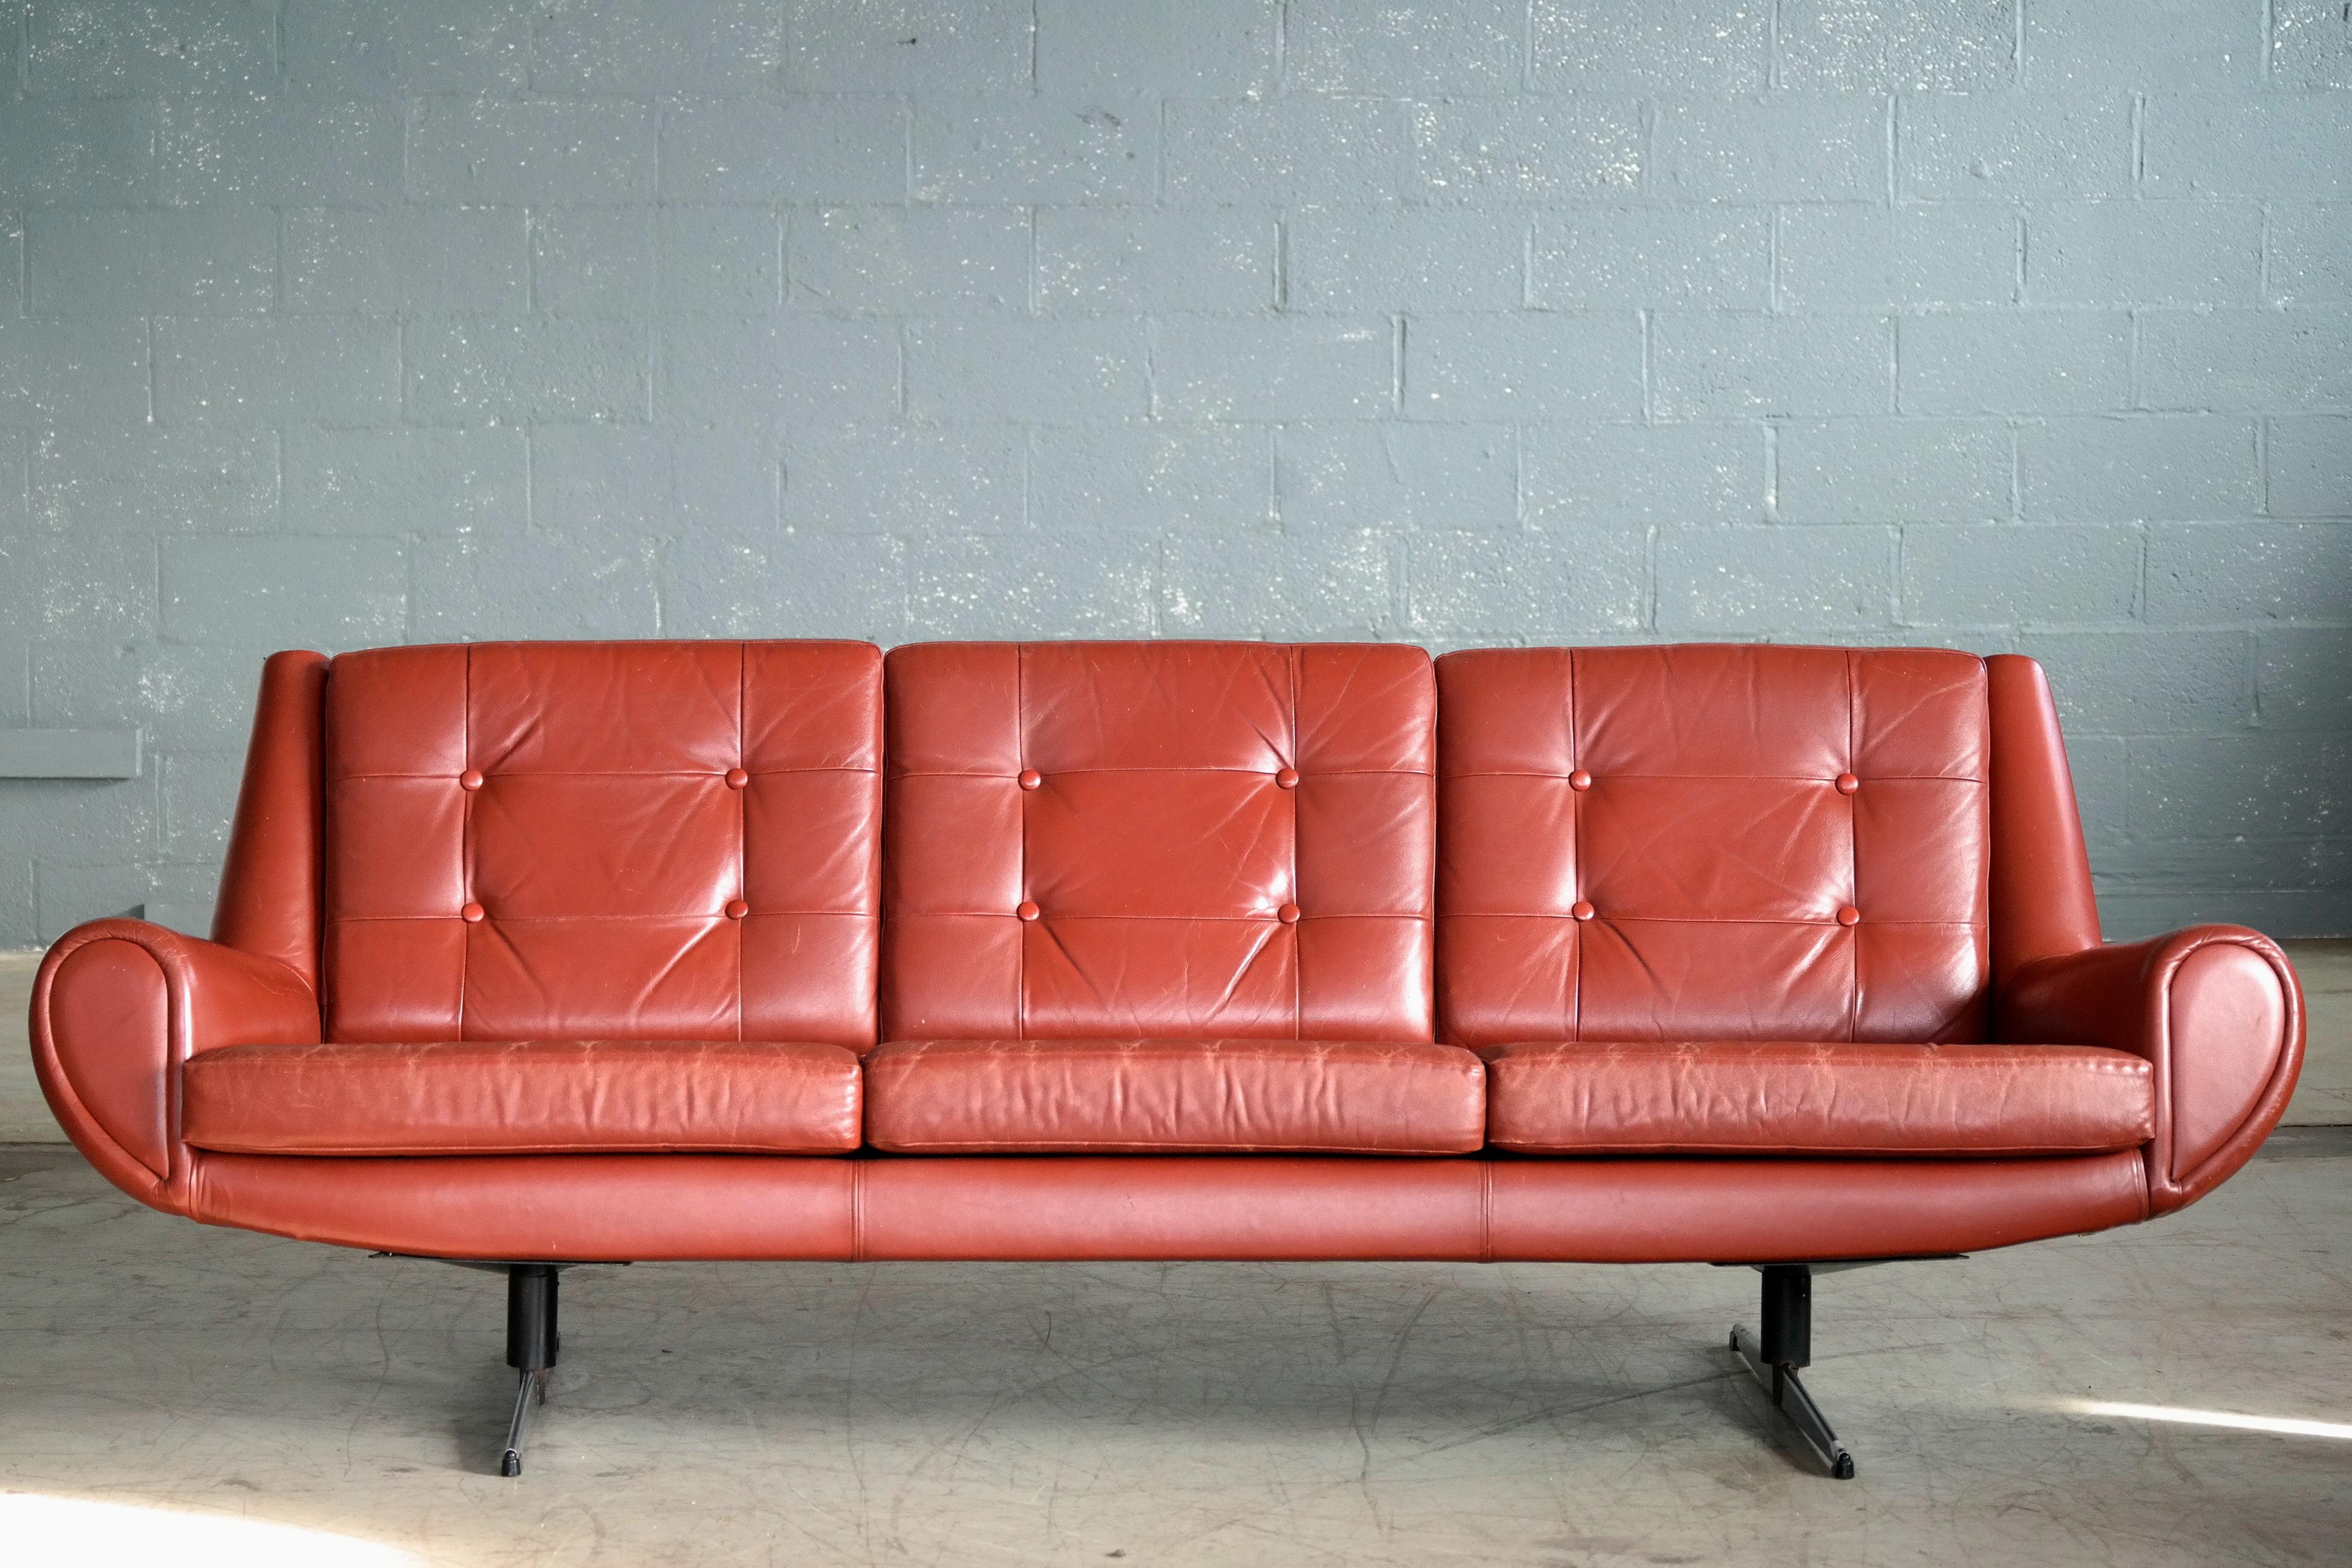 Fabulous Danish airport style sofa in cognac colored leather characteristically raised on metal legs designed by Skjold Sorensen in the late 1960s. We love the rounded edges and thick armrests which was ahead of its time in the 1960s. We have